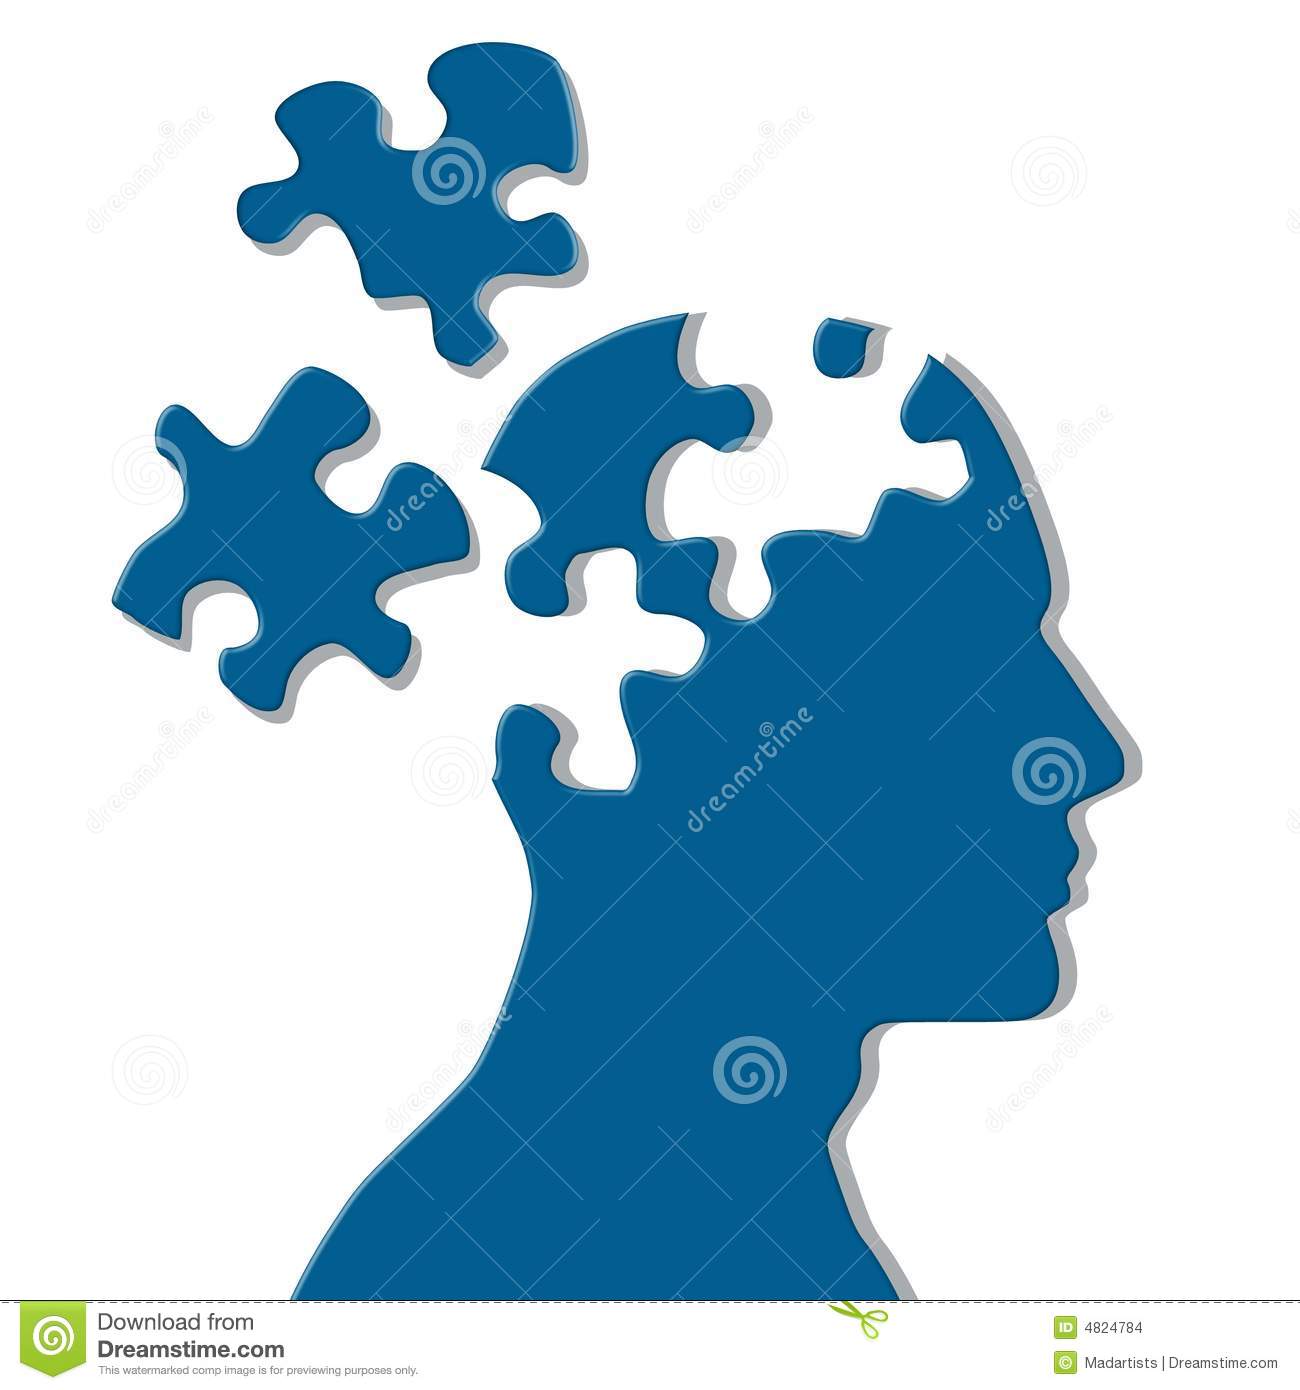 Featuring A Human Head Silhouette In Blue Wth Puzzle Pieces Missing